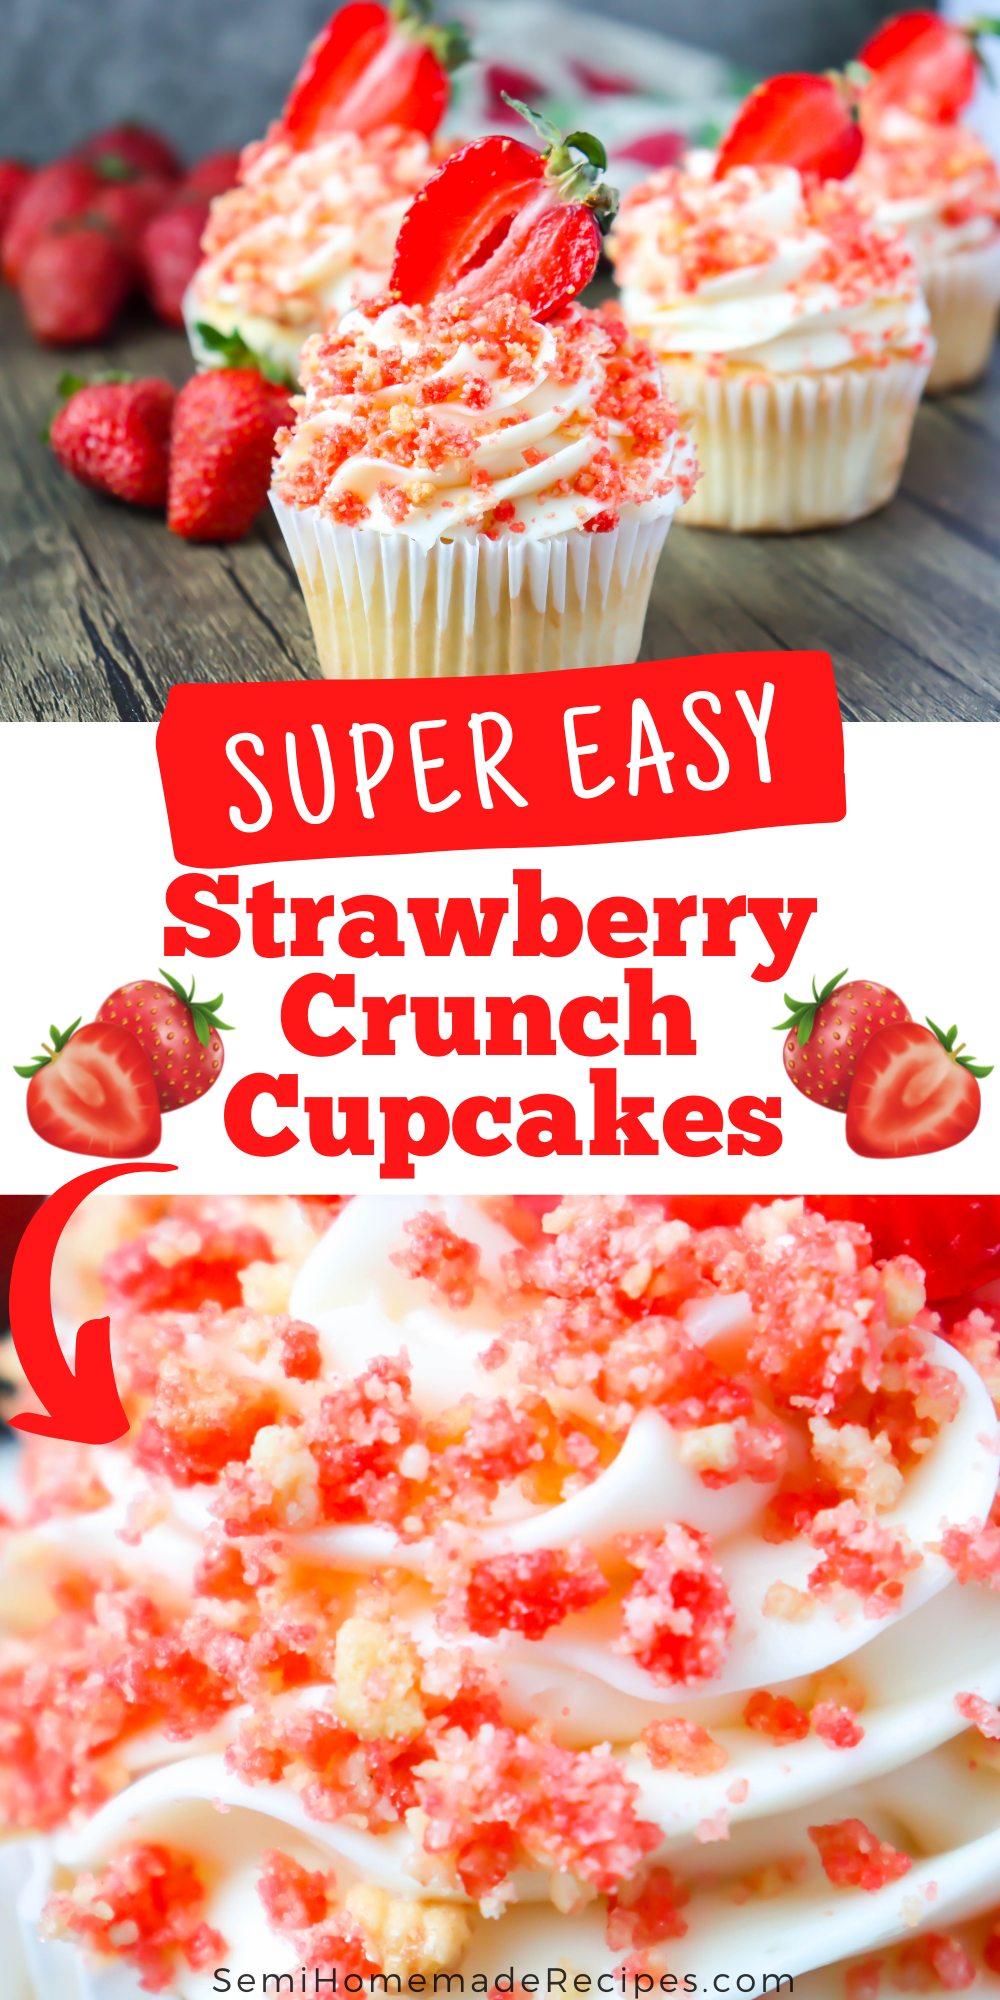 These Strawberry Crunch Cupcakes remind me of those amazing Strawberry Crunch Cupcakes popsicles that we use to get from the ice cream truck as kids! 